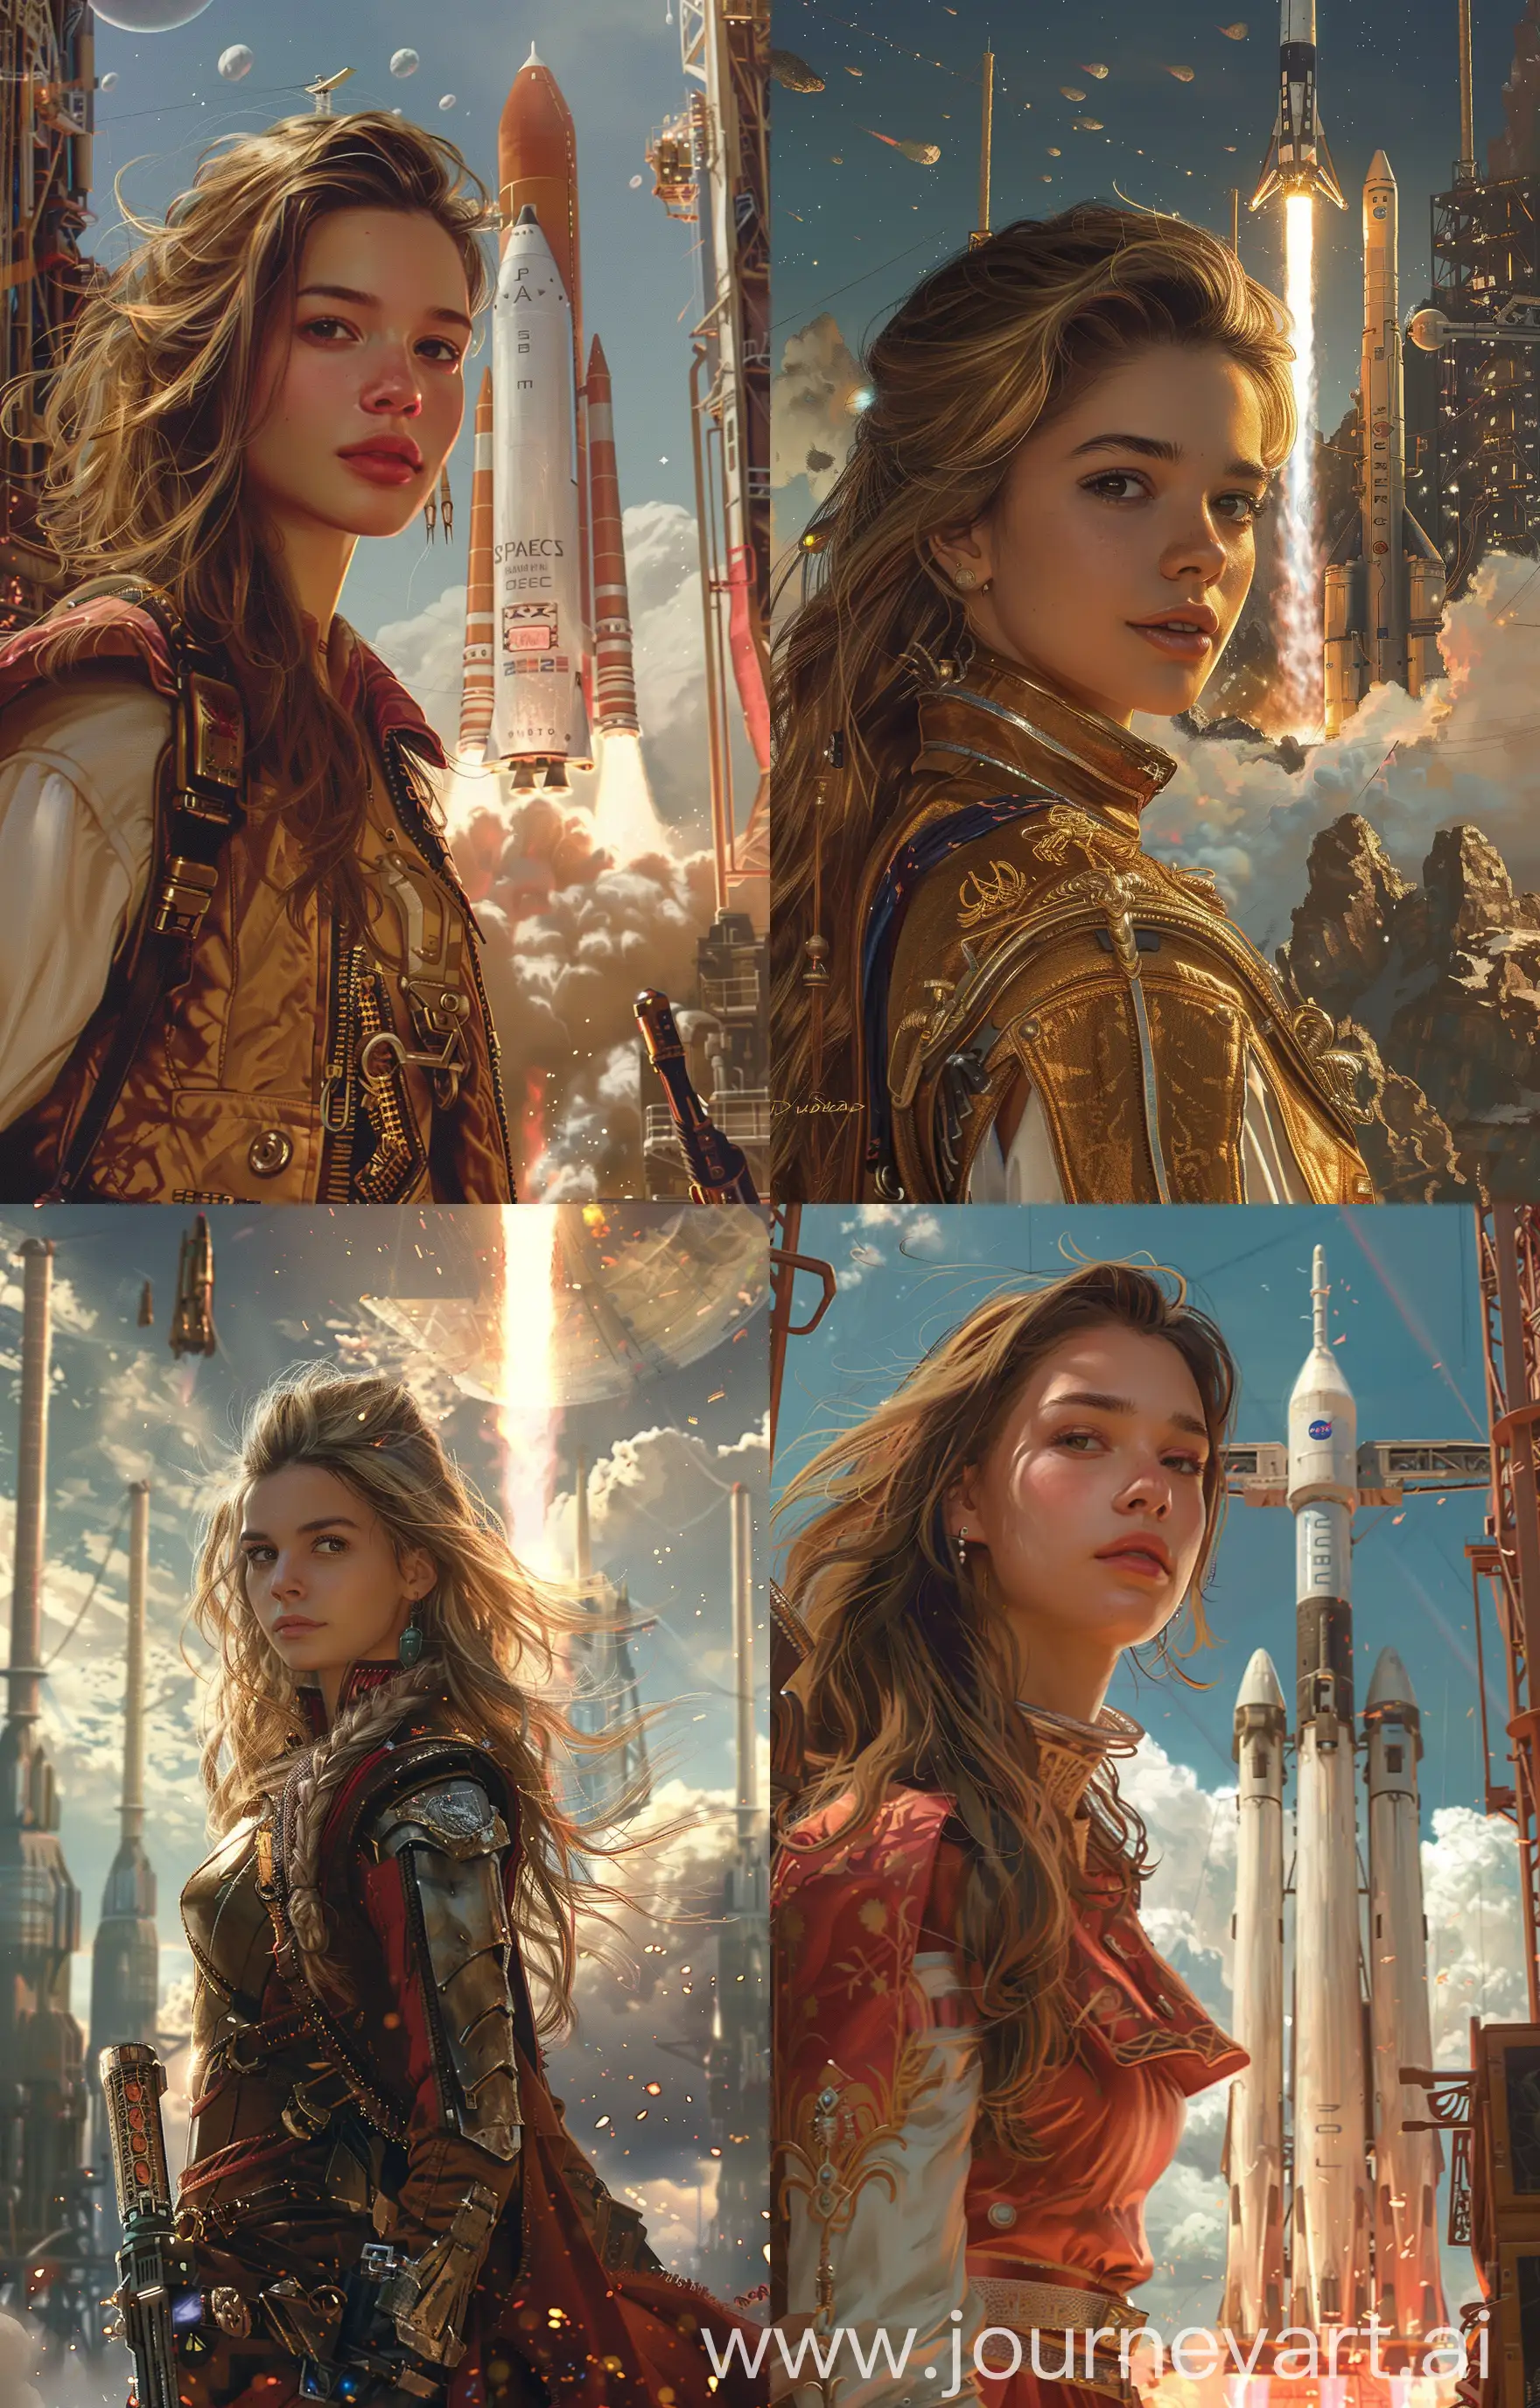 Create a visually exciting and challenging illustration in a realistic fantasy style of a beautiful young woman Space Nomad and Wanderer in front of a spaceship launch. The illustration should depict a scene reminiscent of a Tarot card, show grand scale, and incorporate influences from Nabis and Dungeons & Dragons and cosmoopera --s 250 --ar 9:14